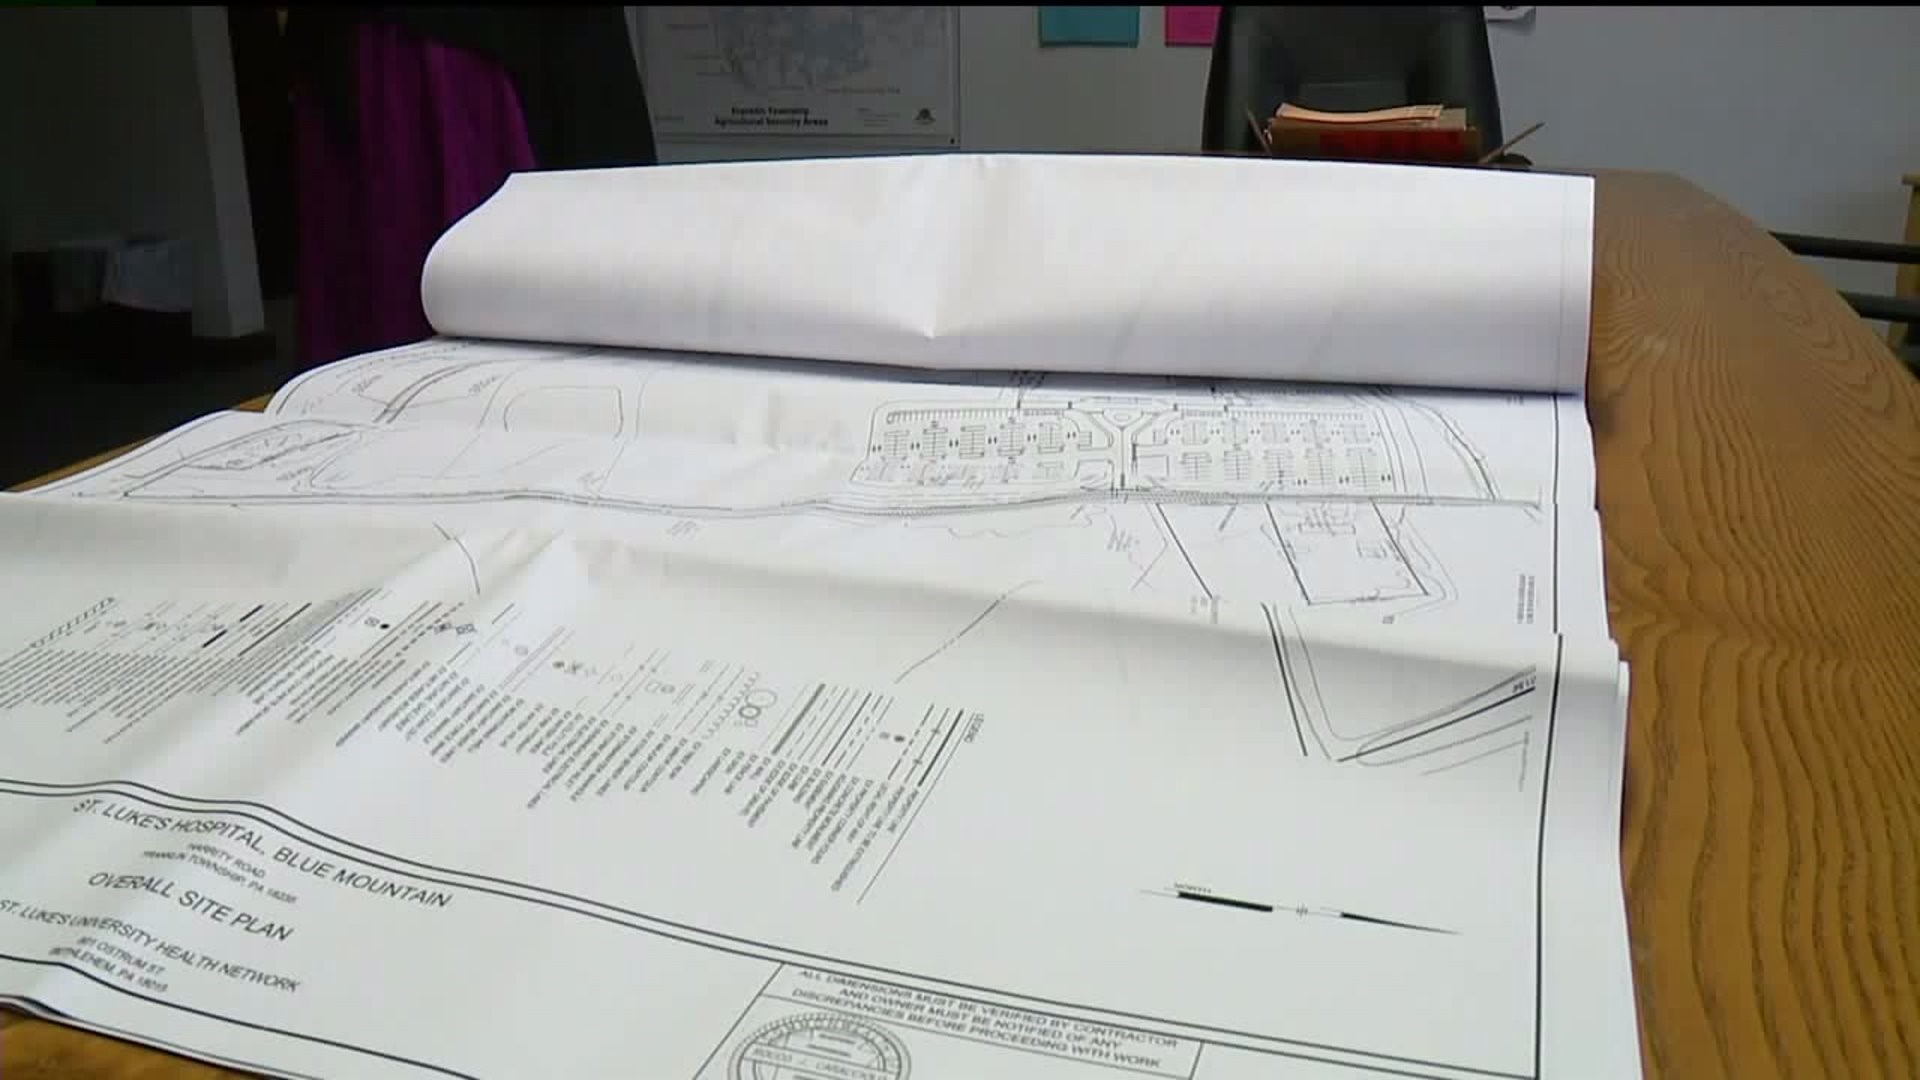 Plans Move Forward for New Hospital in Carbon County